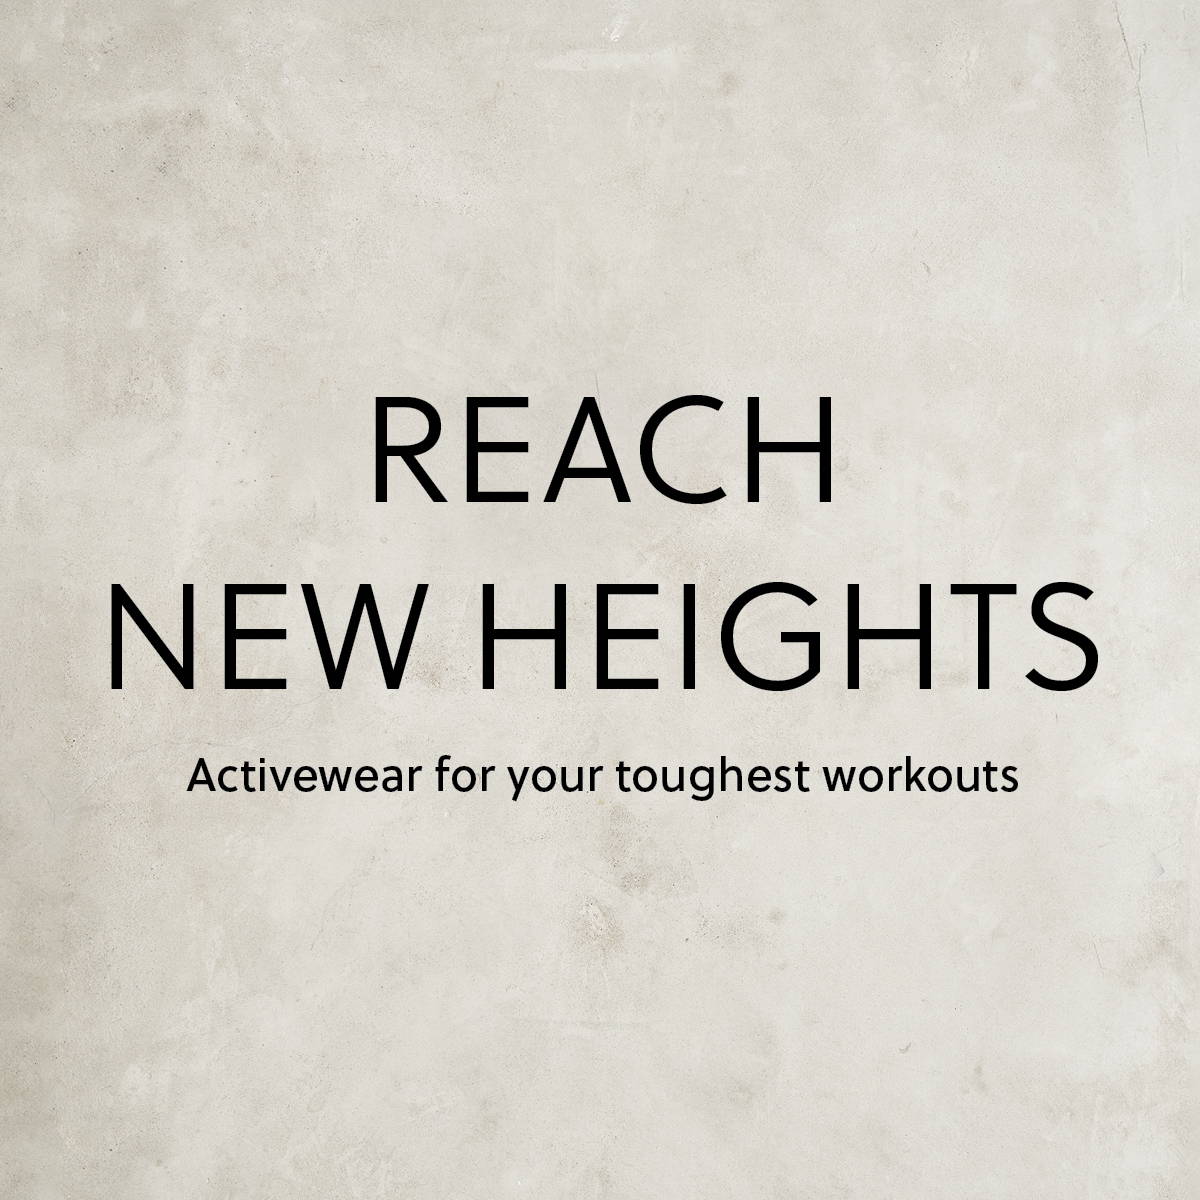 Reach New Heights. Activewear for your toughest workouts.